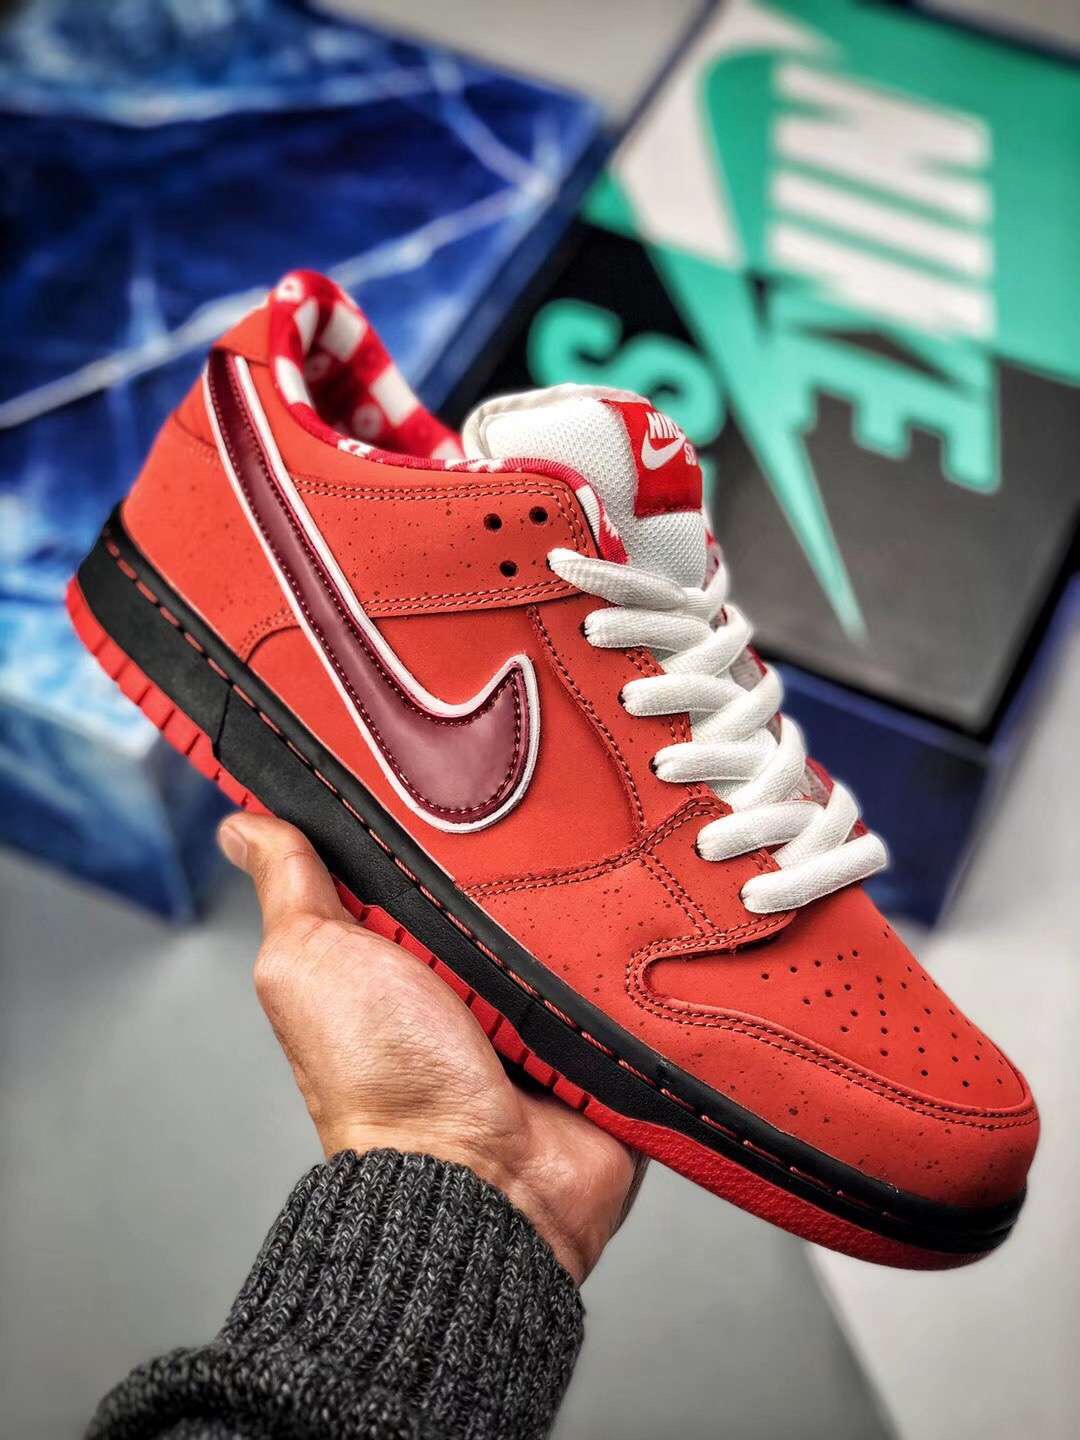 Nike SB Dunk Low “Lobster” Sport Red/Pink Clay For Sale – Sneaker Hello